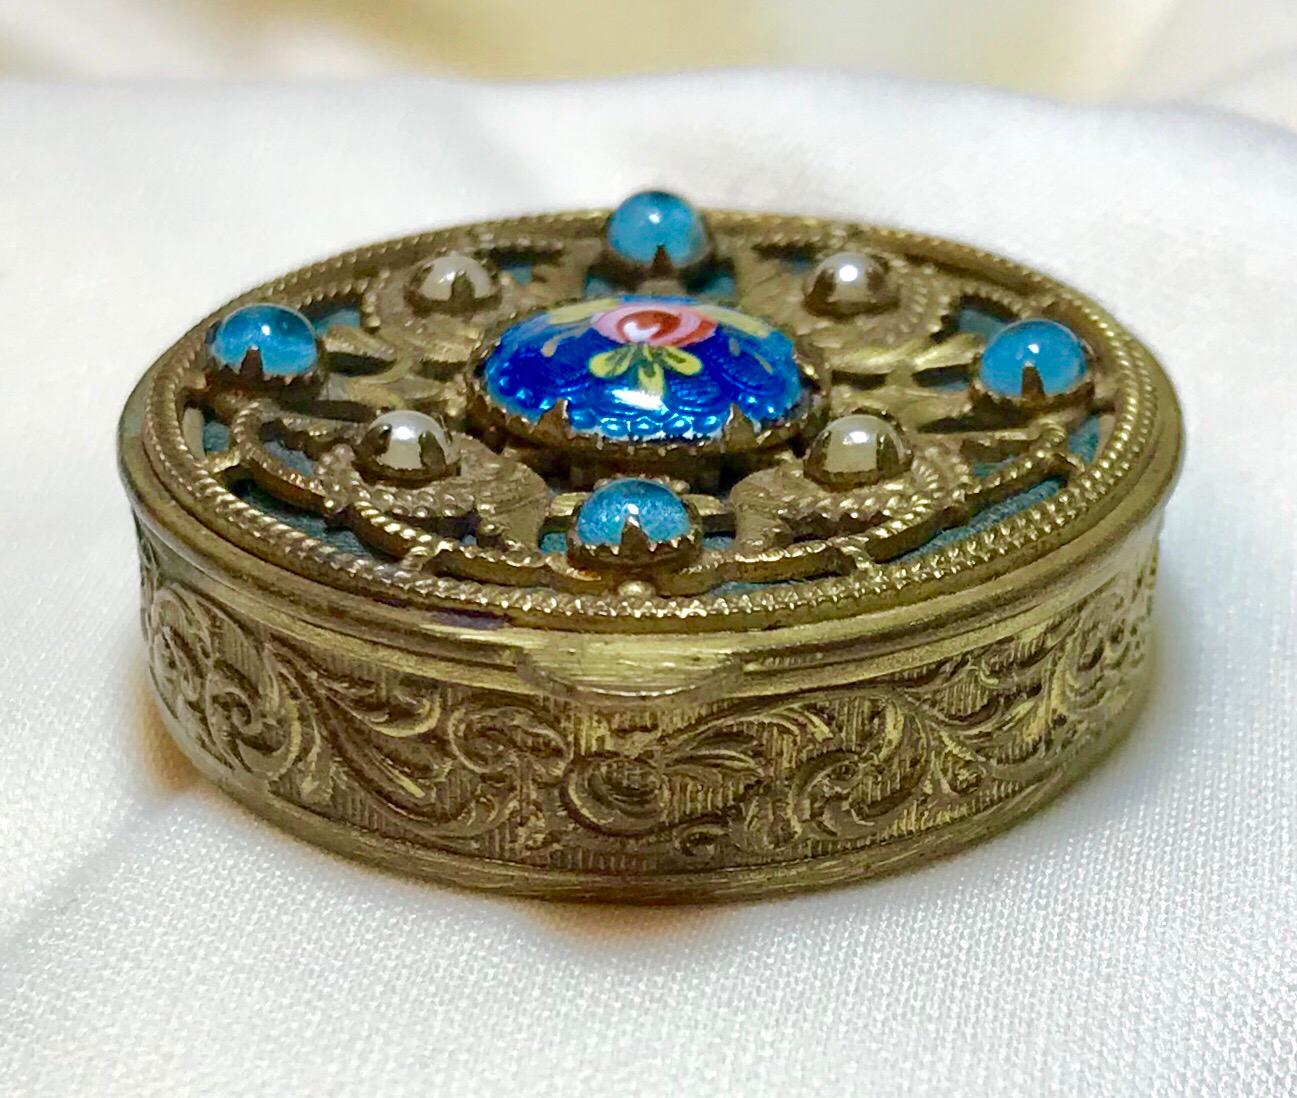 Circa 1920s French ornately designed gold tone powder compact. The top has an openwork design over a blue-green fabric and is embellished with prong set glass cabochons around a guilloche enamel cartouche with a hand painted rose.  It is decorated